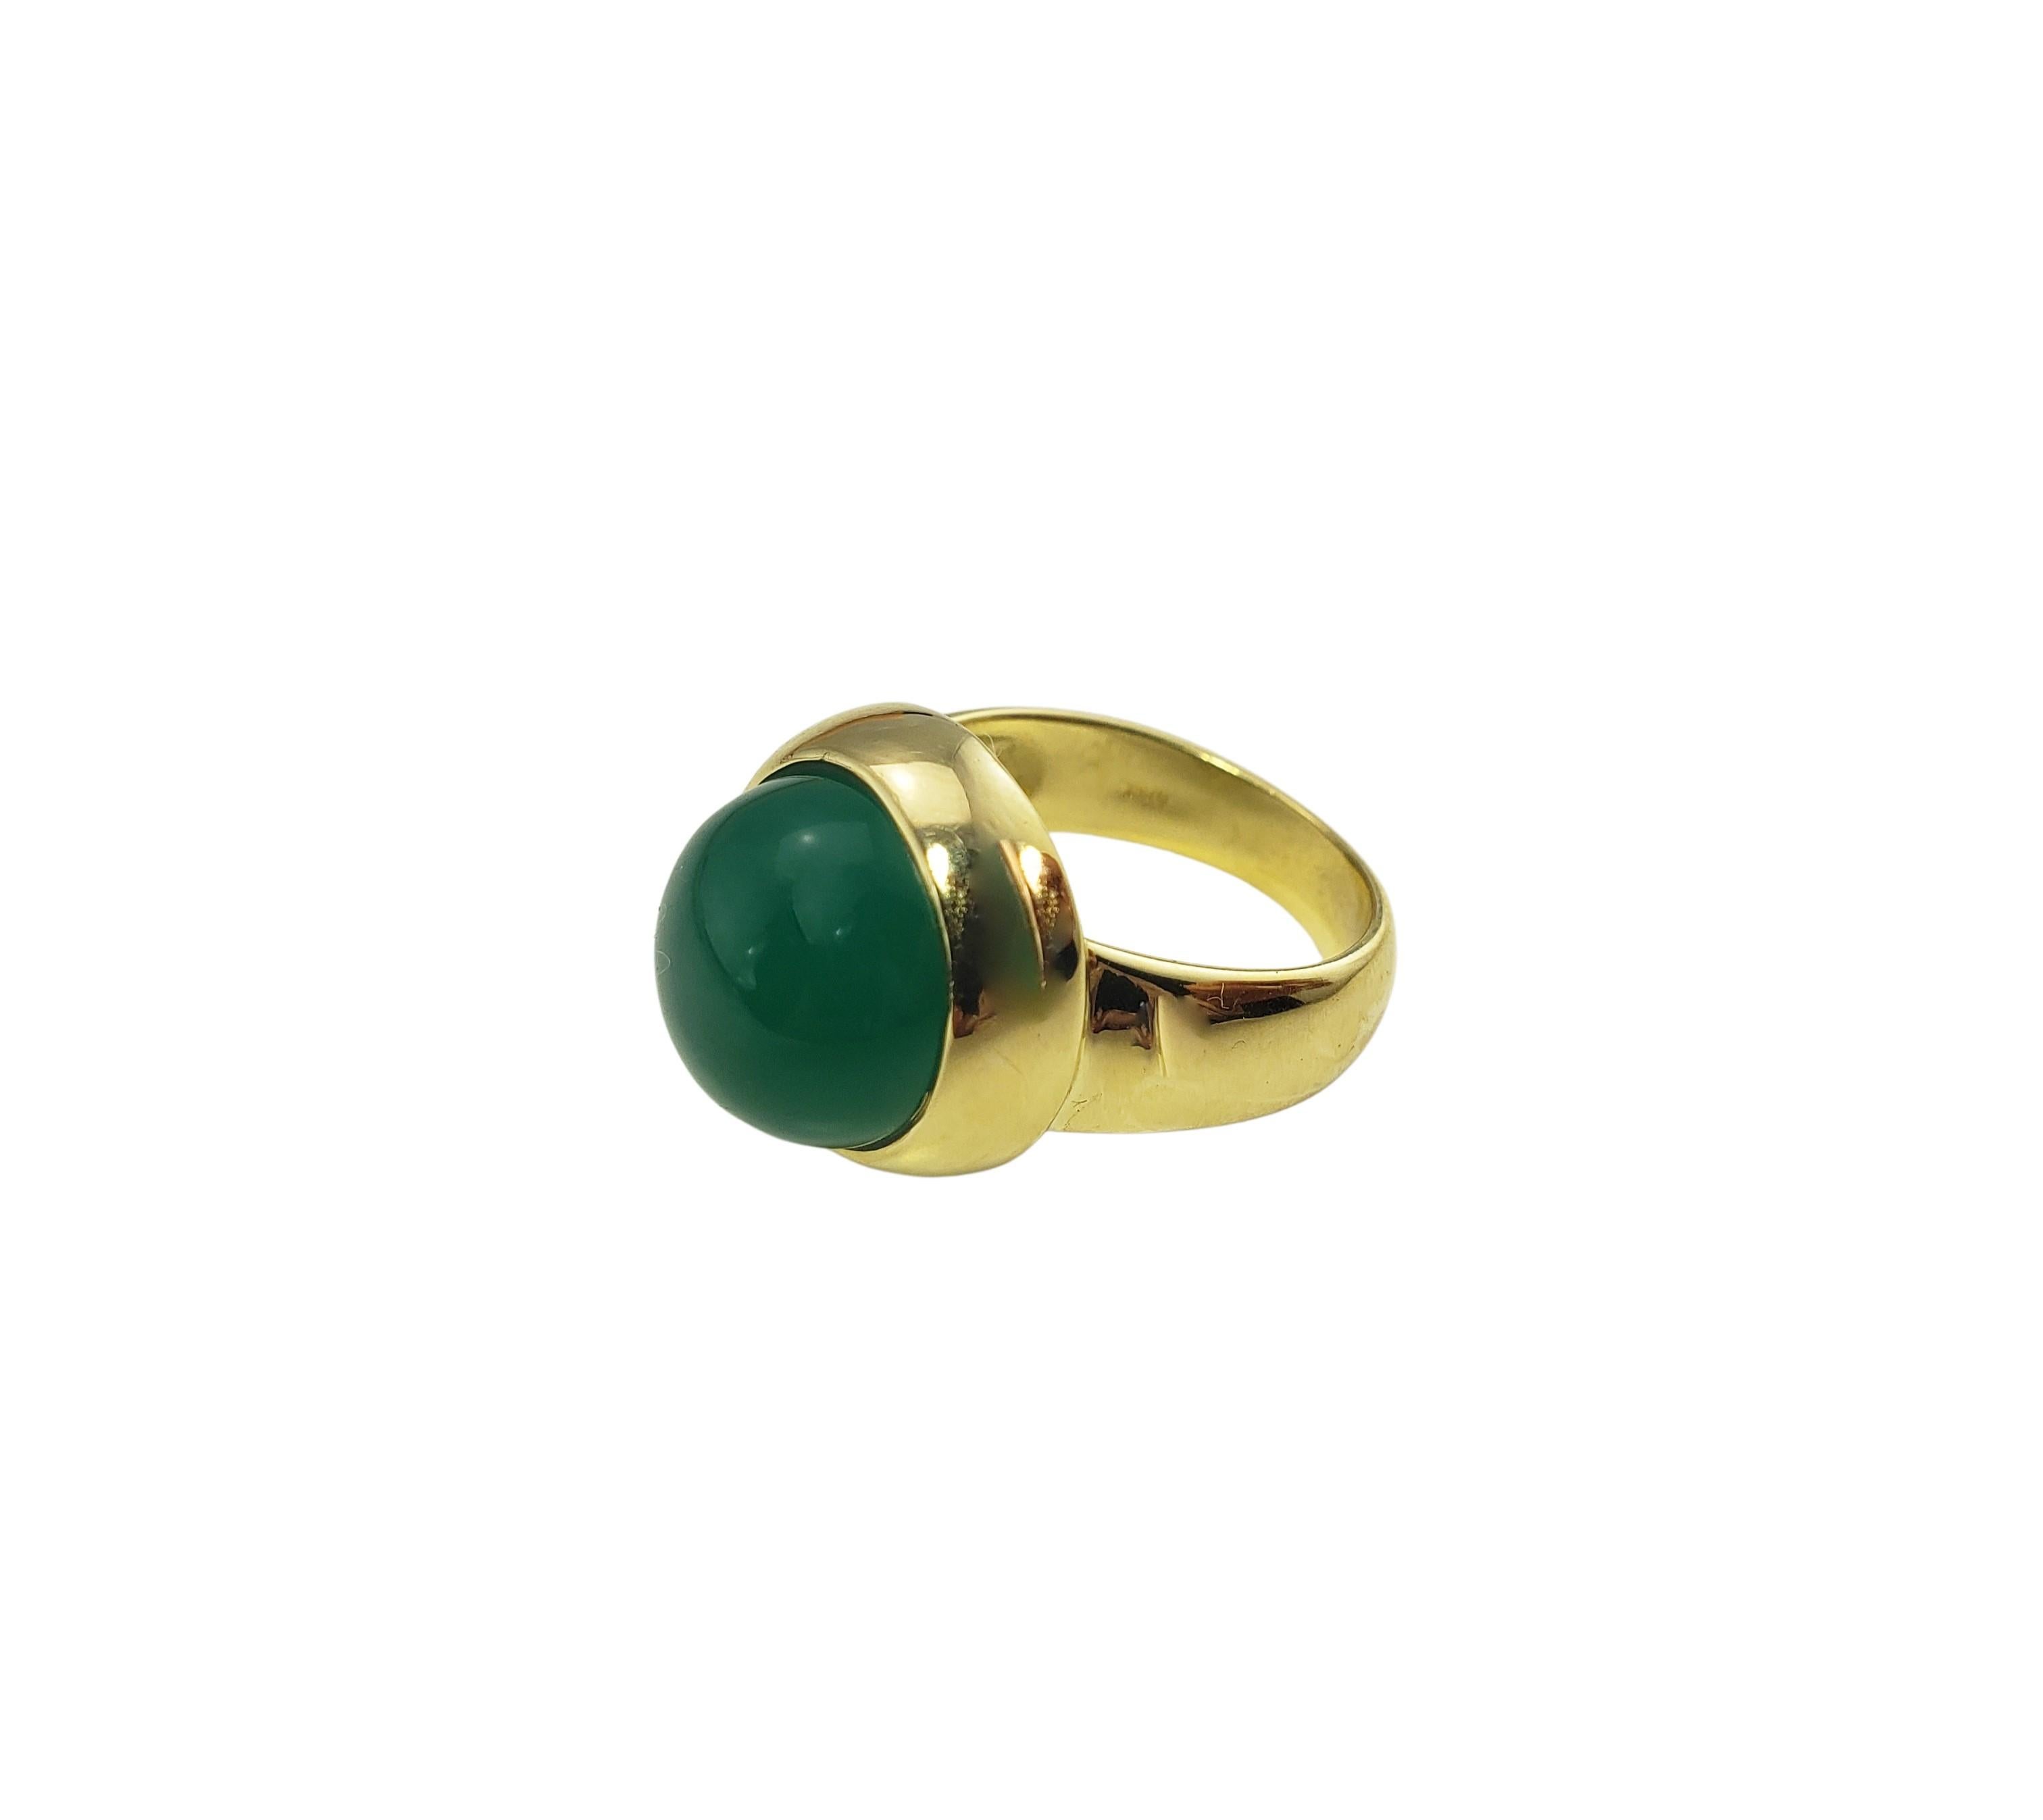 Women's 18 Karat Yellow Gold and Green Onyx Ring Size 6.5 For Sale